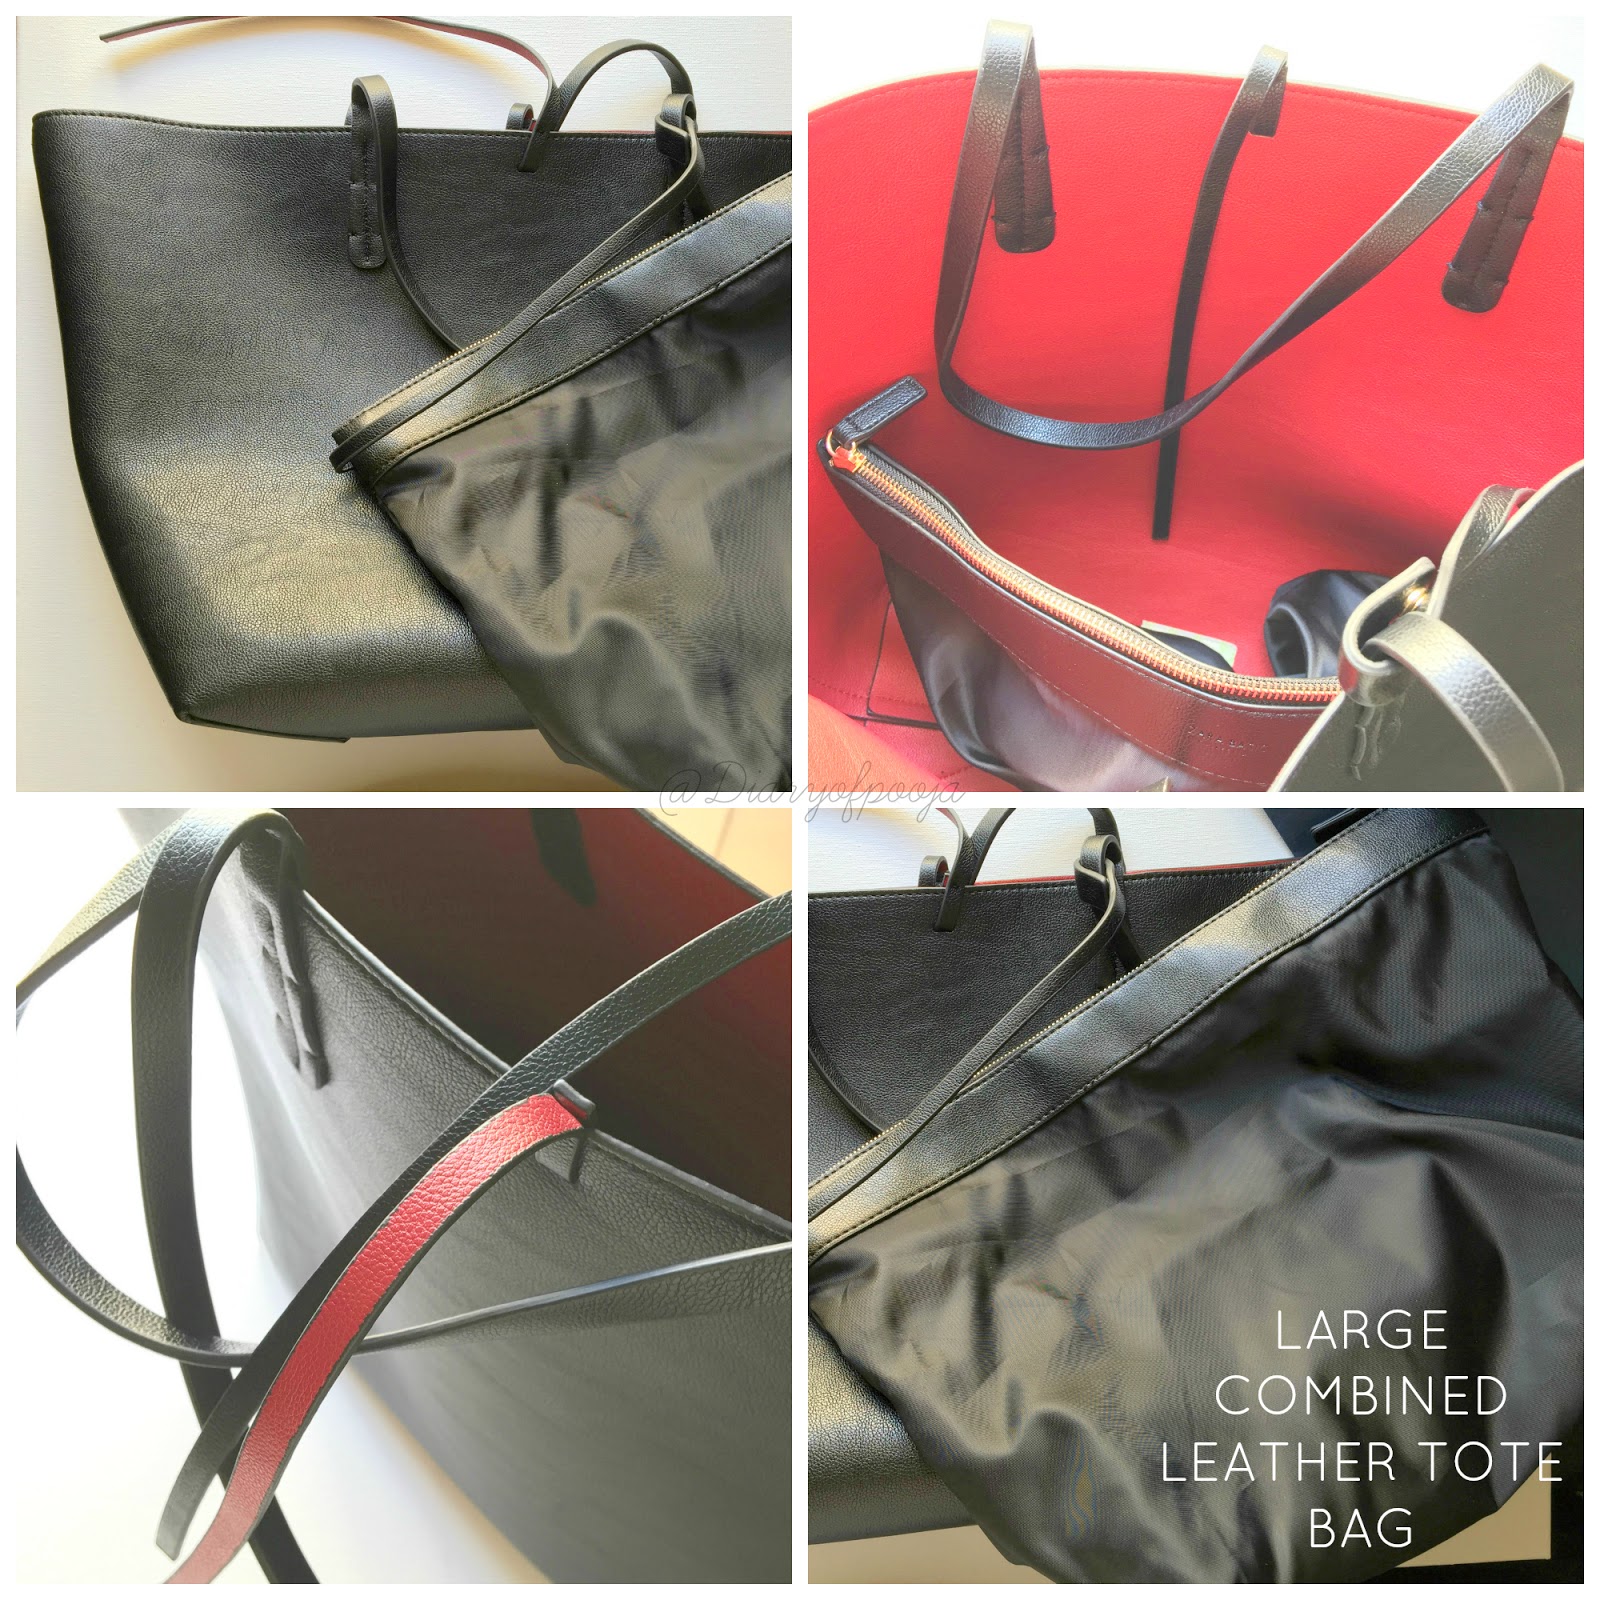 zara tote bag with metal clasp